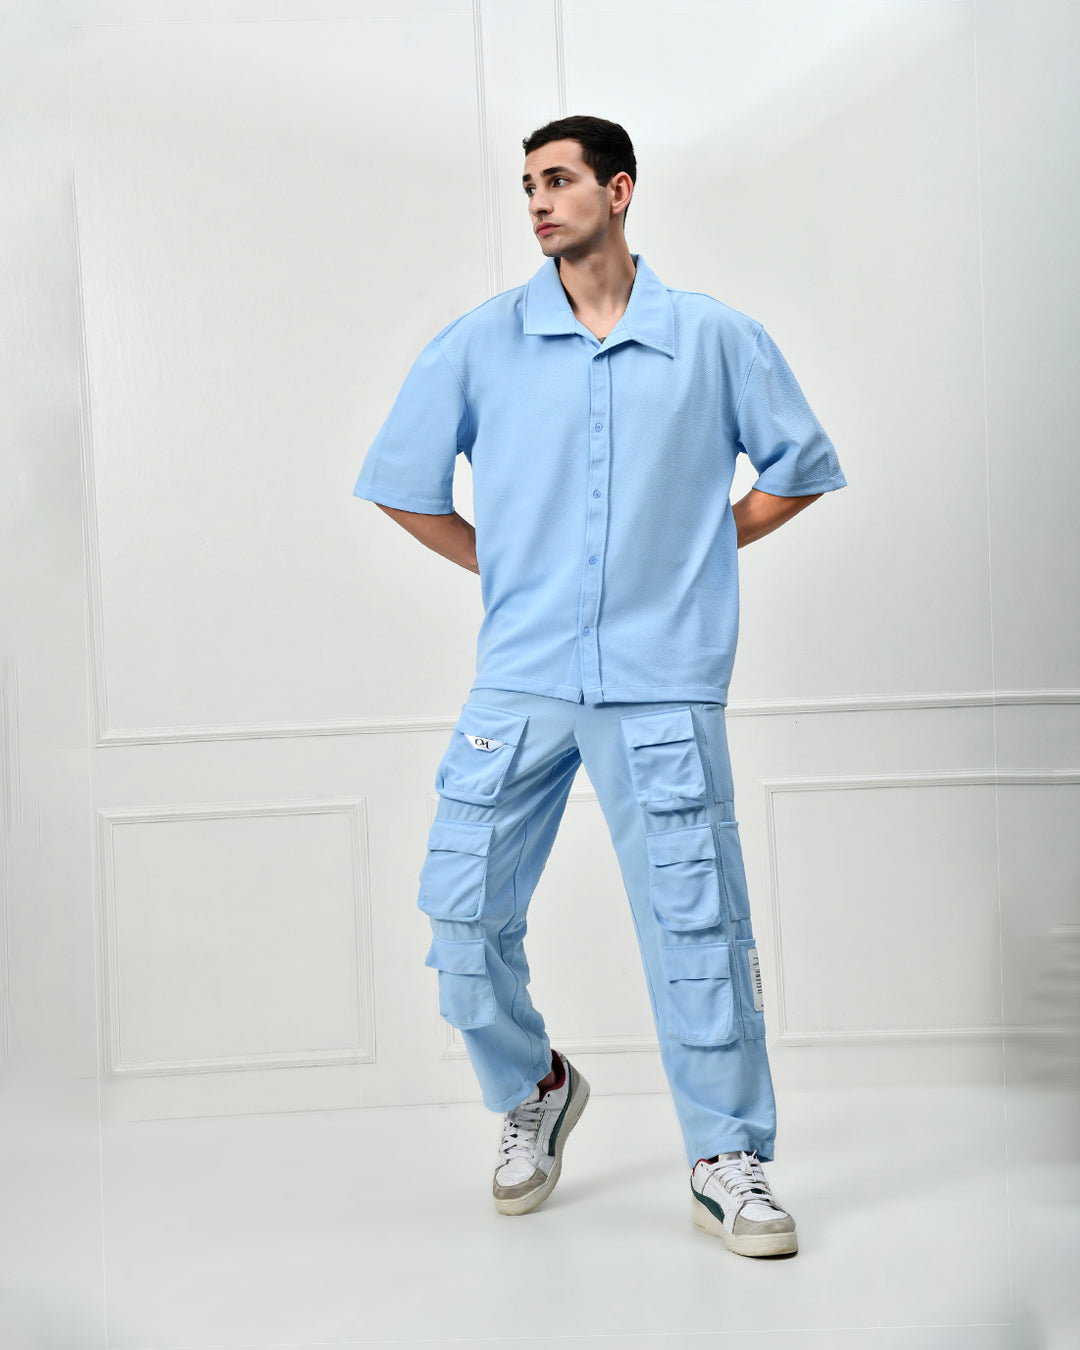 Sky Blue Shirt Co-ord Set By Offmint